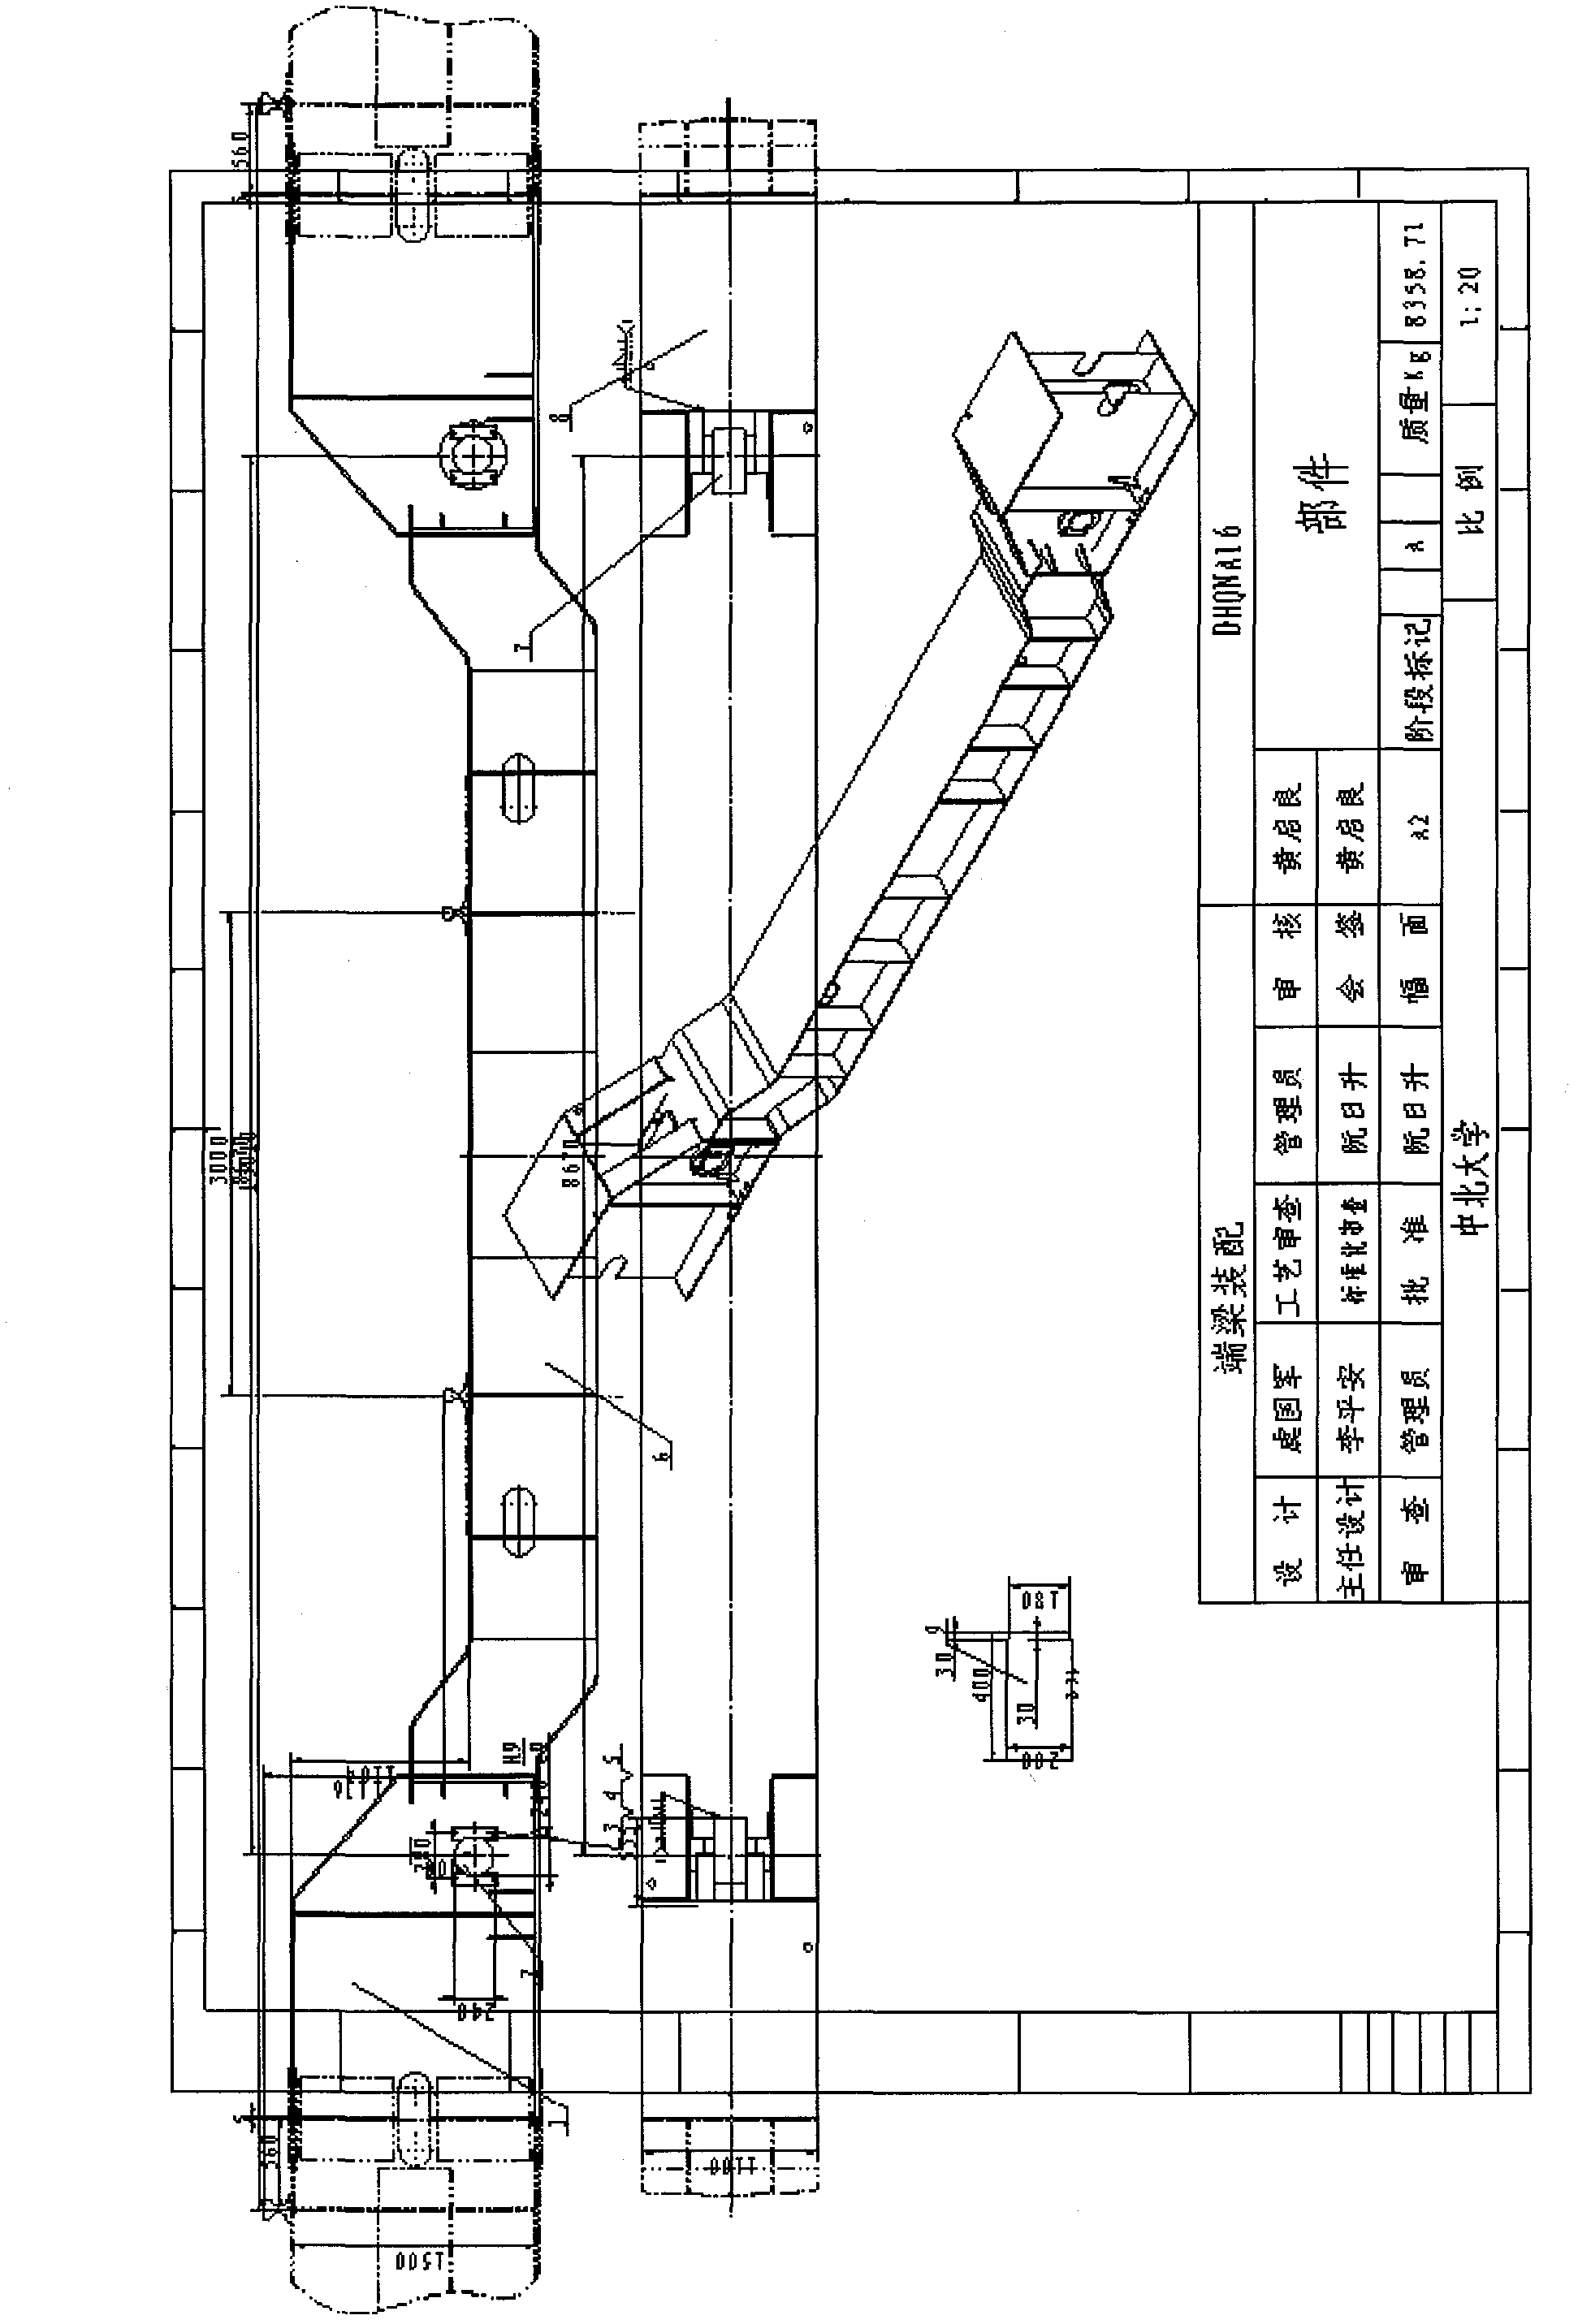 Method for rapidly making drawing of beam structural part and optimizing drawing